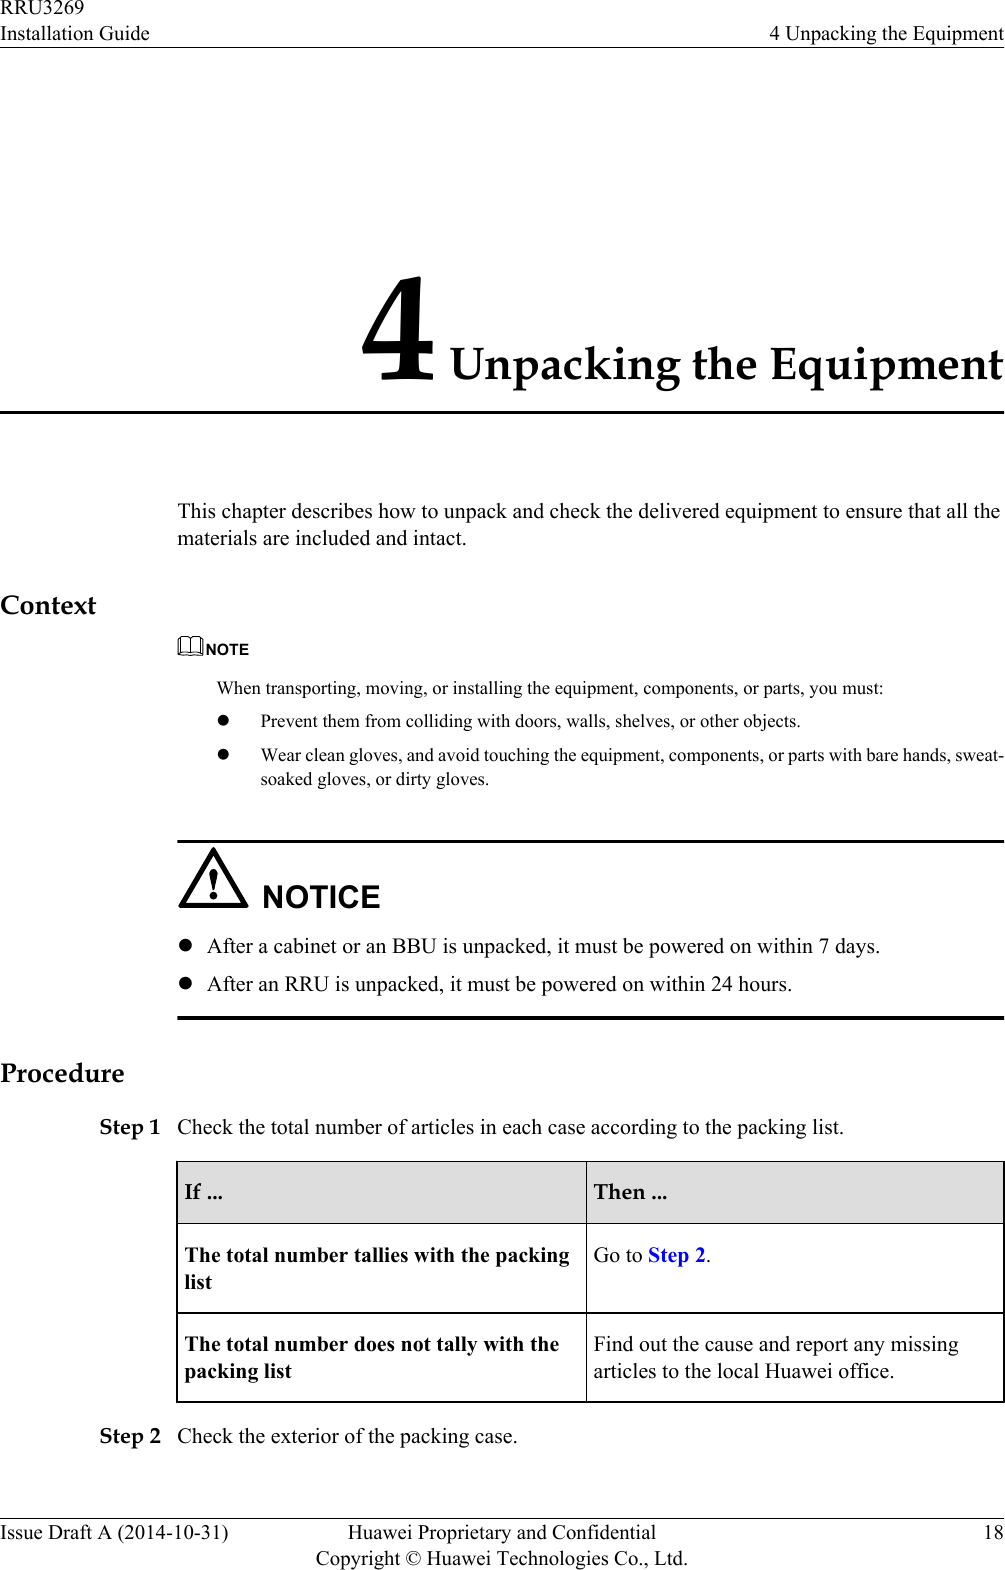 4 Unpacking the EquipmentThis chapter describes how to unpack and check the delivered equipment to ensure that all thematerials are included and intact.ContextNOTEWhen transporting, moving, or installing the equipment, components, or parts, you must:lPrevent them from colliding with doors, walls, shelves, or other objects.lWear clean gloves, and avoid touching the equipment, components, or parts with bare hands, sweat-soaked gloves, or dirty gloves.NOTICElAfter a cabinet or an BBU is unpacked, it must be powered on within 7 days.lAfter an RRU is unpacked, it must be powered on within 24 hours.ProcedureStep 1 Check the total number of articles in each case according to the packing list.If ... Then ...The total number tallies with the packinglistGo to Step 2.The total number does not tally with thepacking listFind out the cause and report any missingarticles to the local Huawei office.Step 2 Check the exterior of the packing case.RRU3269Installation Guide 4 Unpacking the EquipmentIssue Draft A (2014-10-31) Huawei Proprietary and ConfidentialCopyright © Huawei Technologies Co., Ltd.18